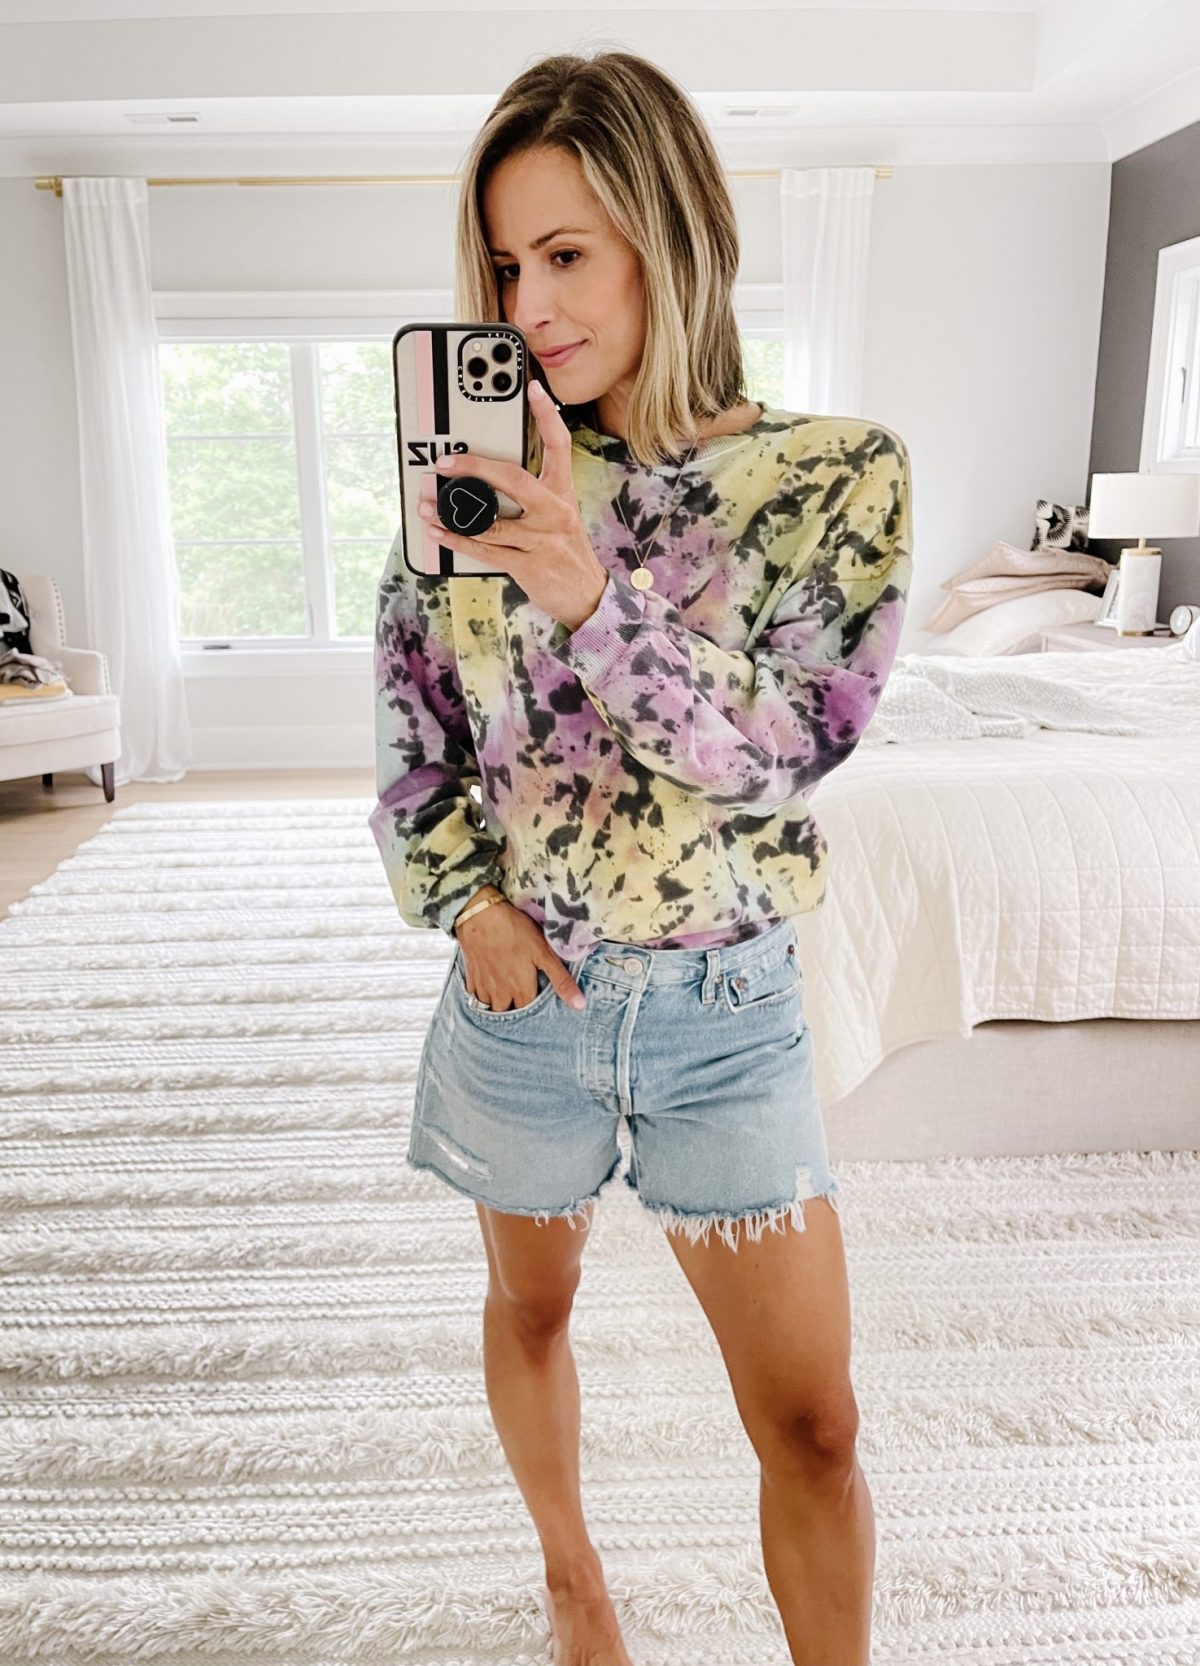 Late summer #ootd round up, sweatshirt and cut offs